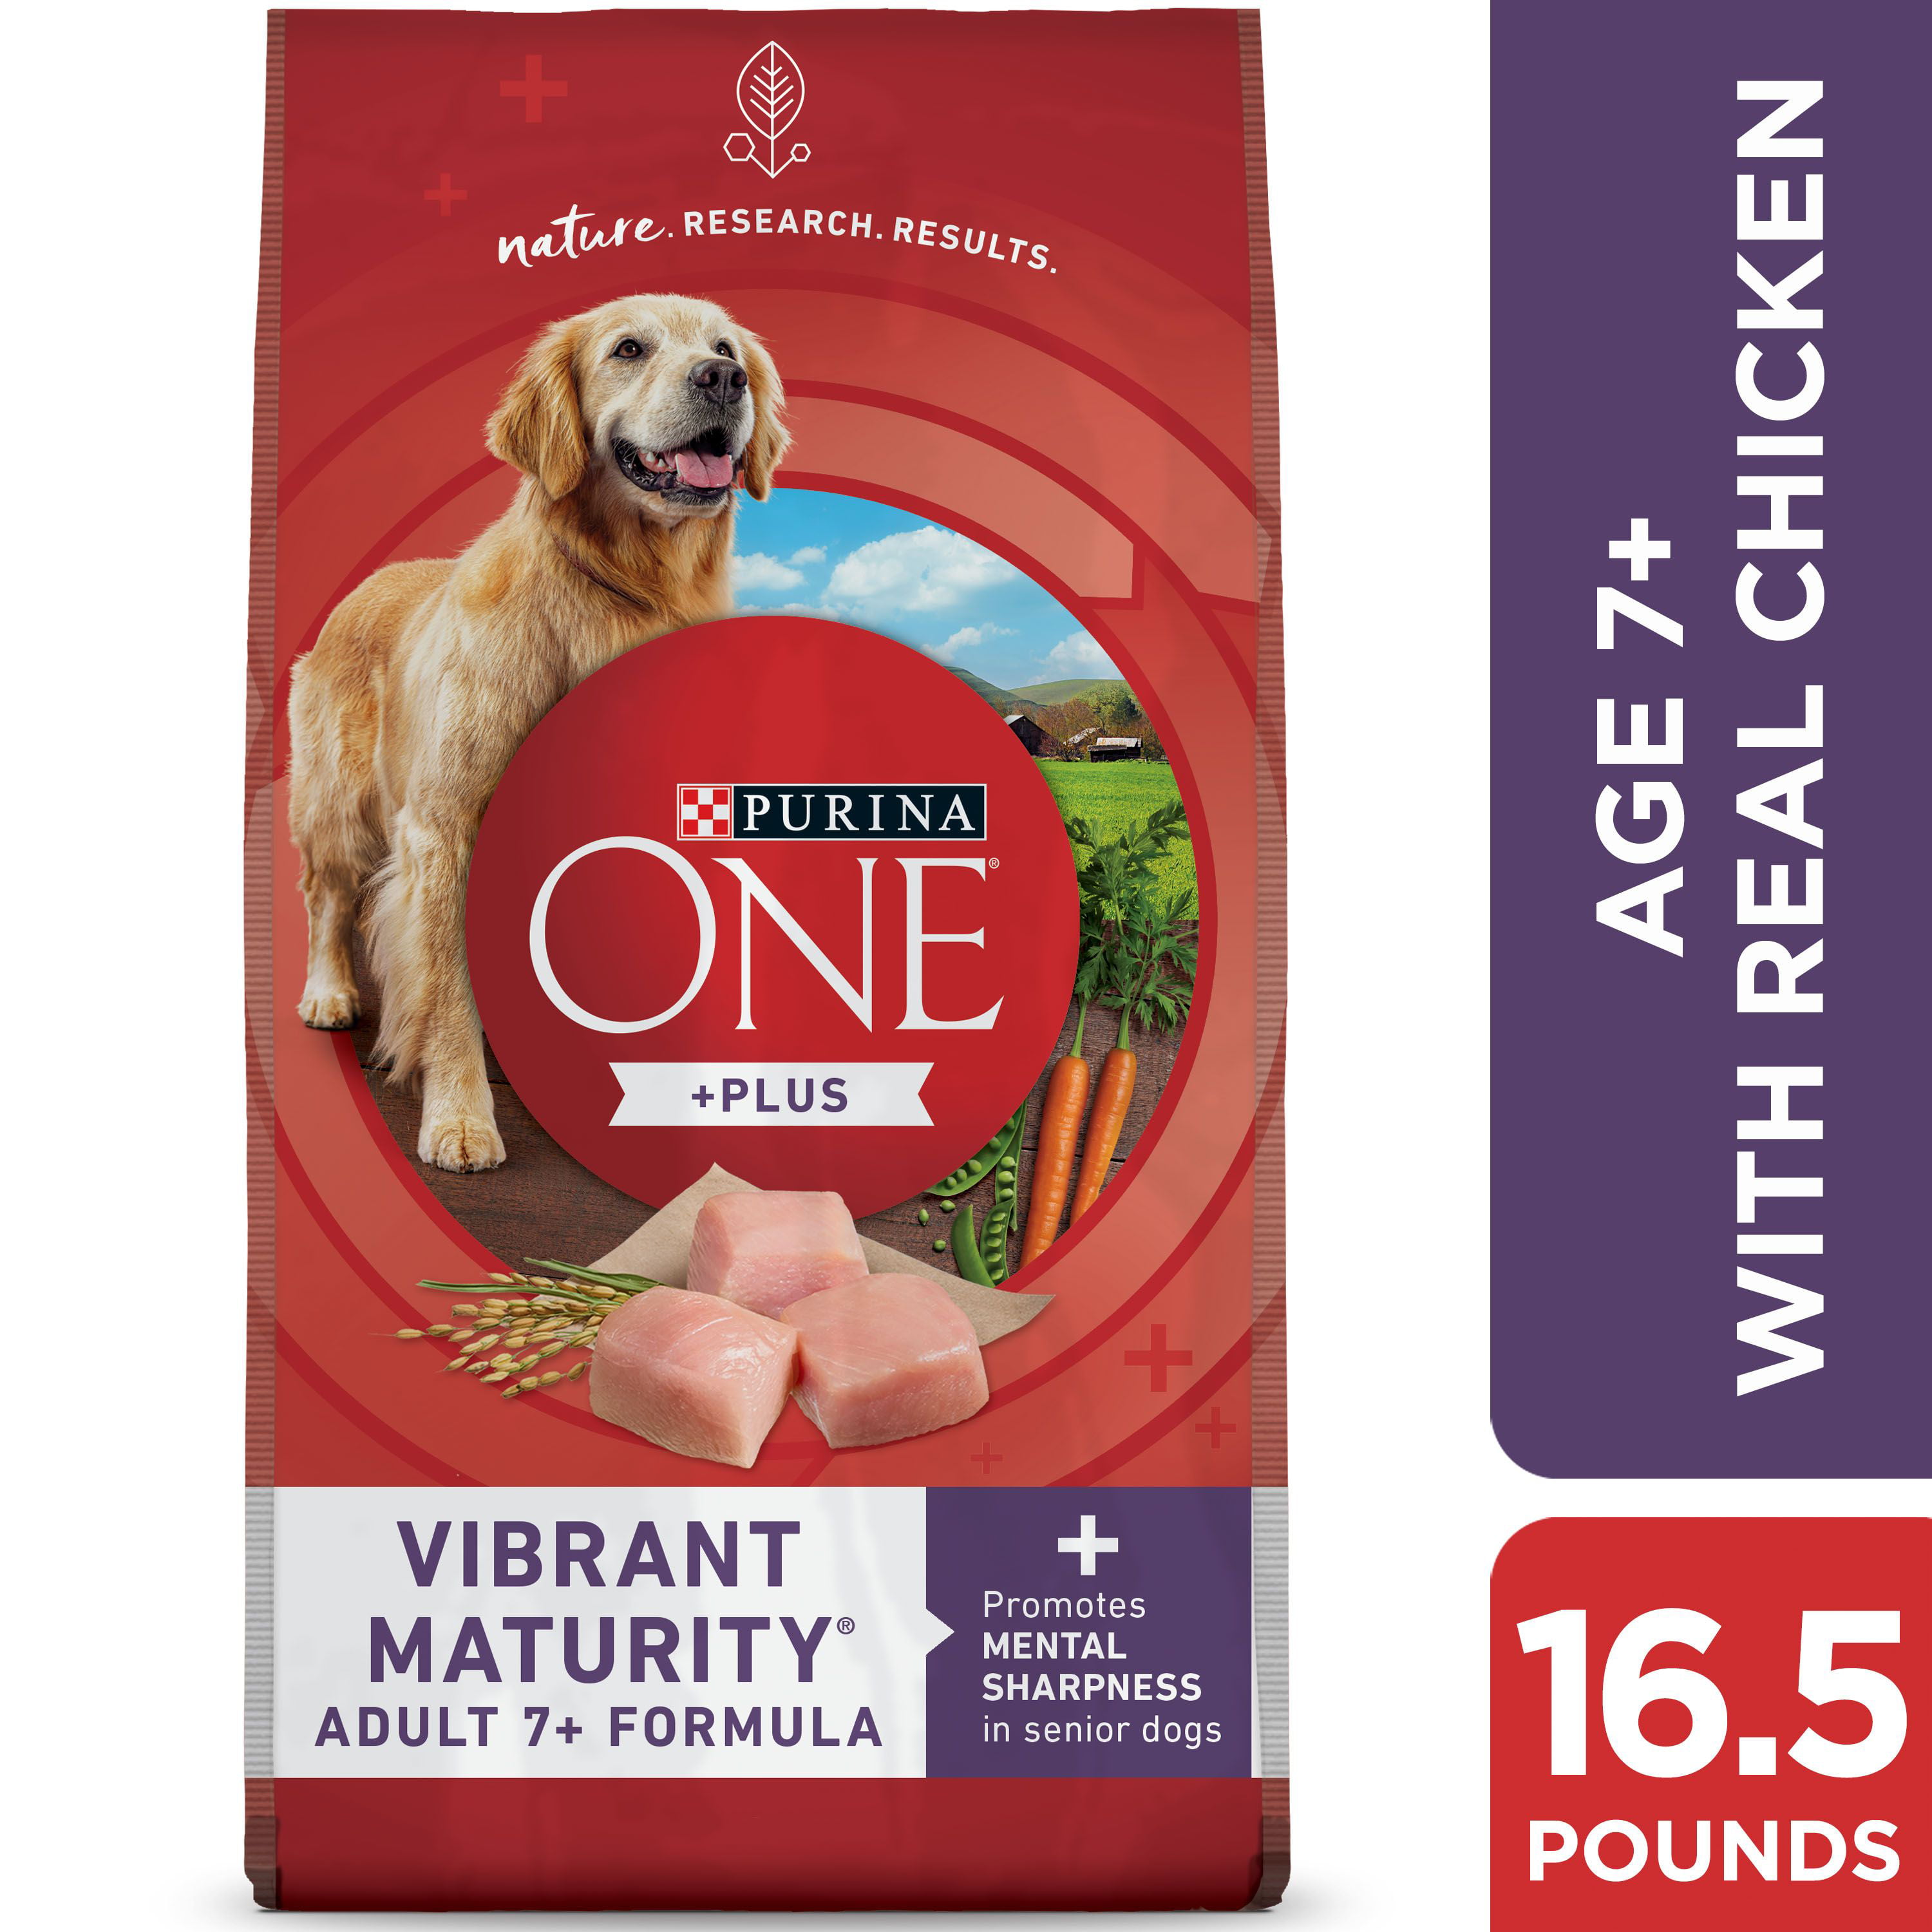 top-10-picks-for-feeding-your-senior-pup-a-review-of-purina-one